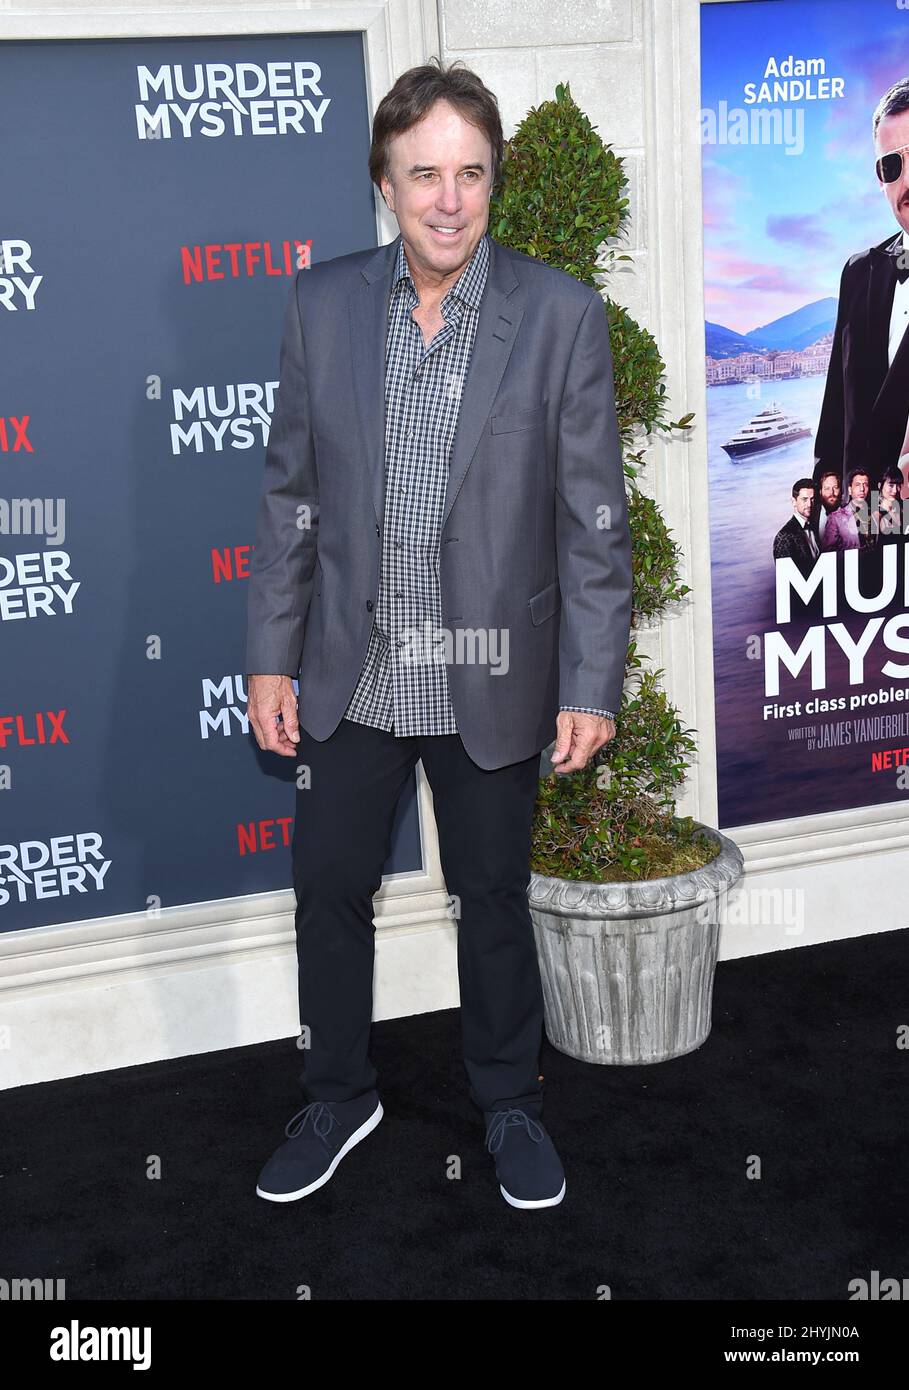 Kevin Nealon attending the premiere of Murder Mystery in Los Angeles, California Stock Photo